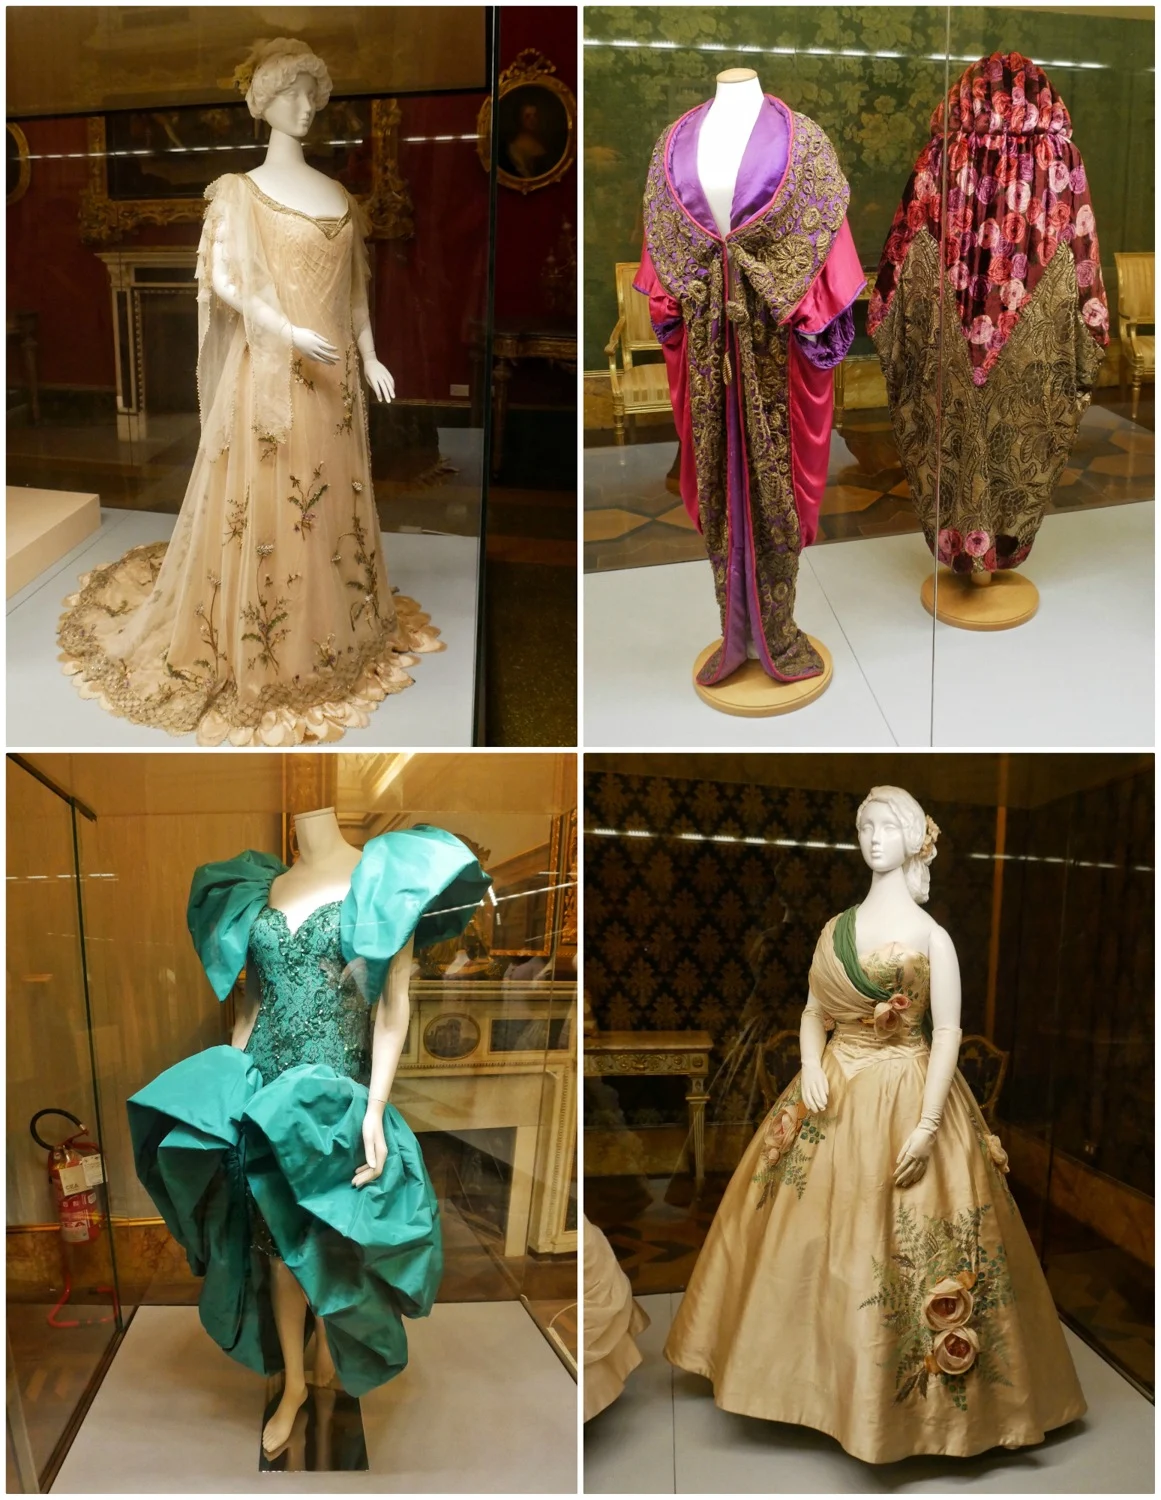 Fashion museum in Pitti Palace in Florence, Italy Photo Heatheronhertravels.com